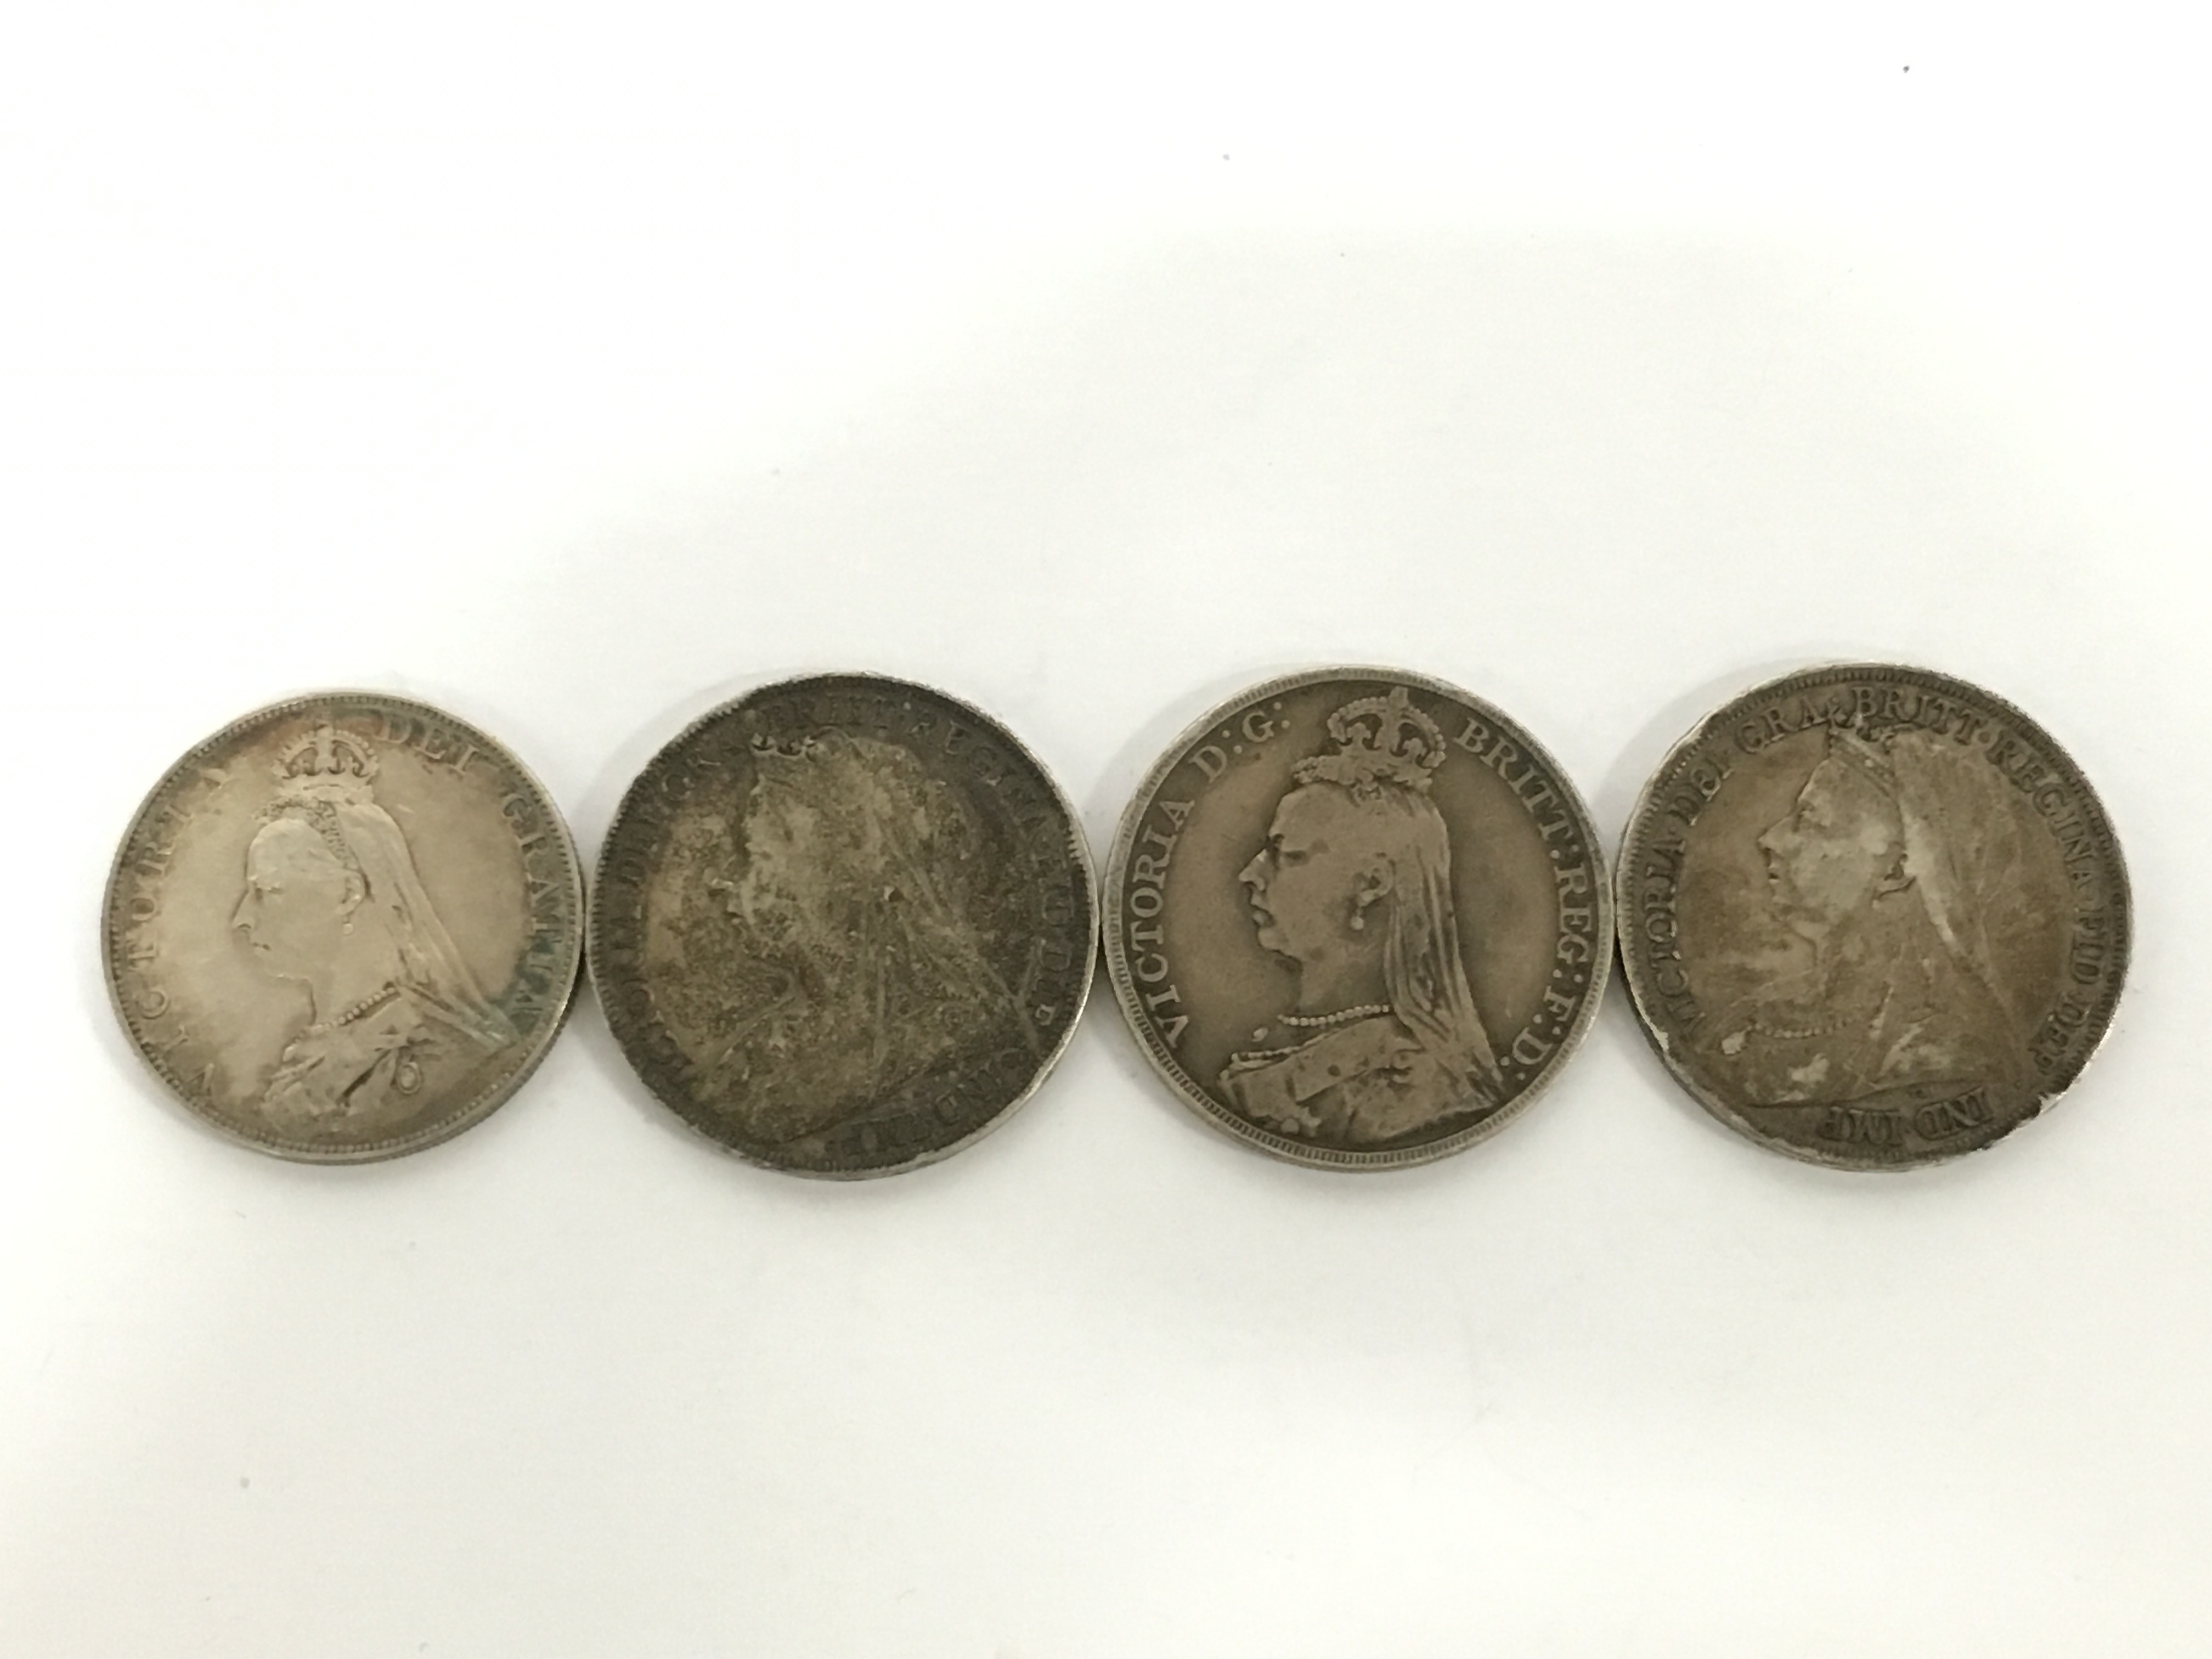 Three Victorian silver Crowns: 1889, 1893 and 1896 together with an 1887 half Crown. - Image 2 of 2